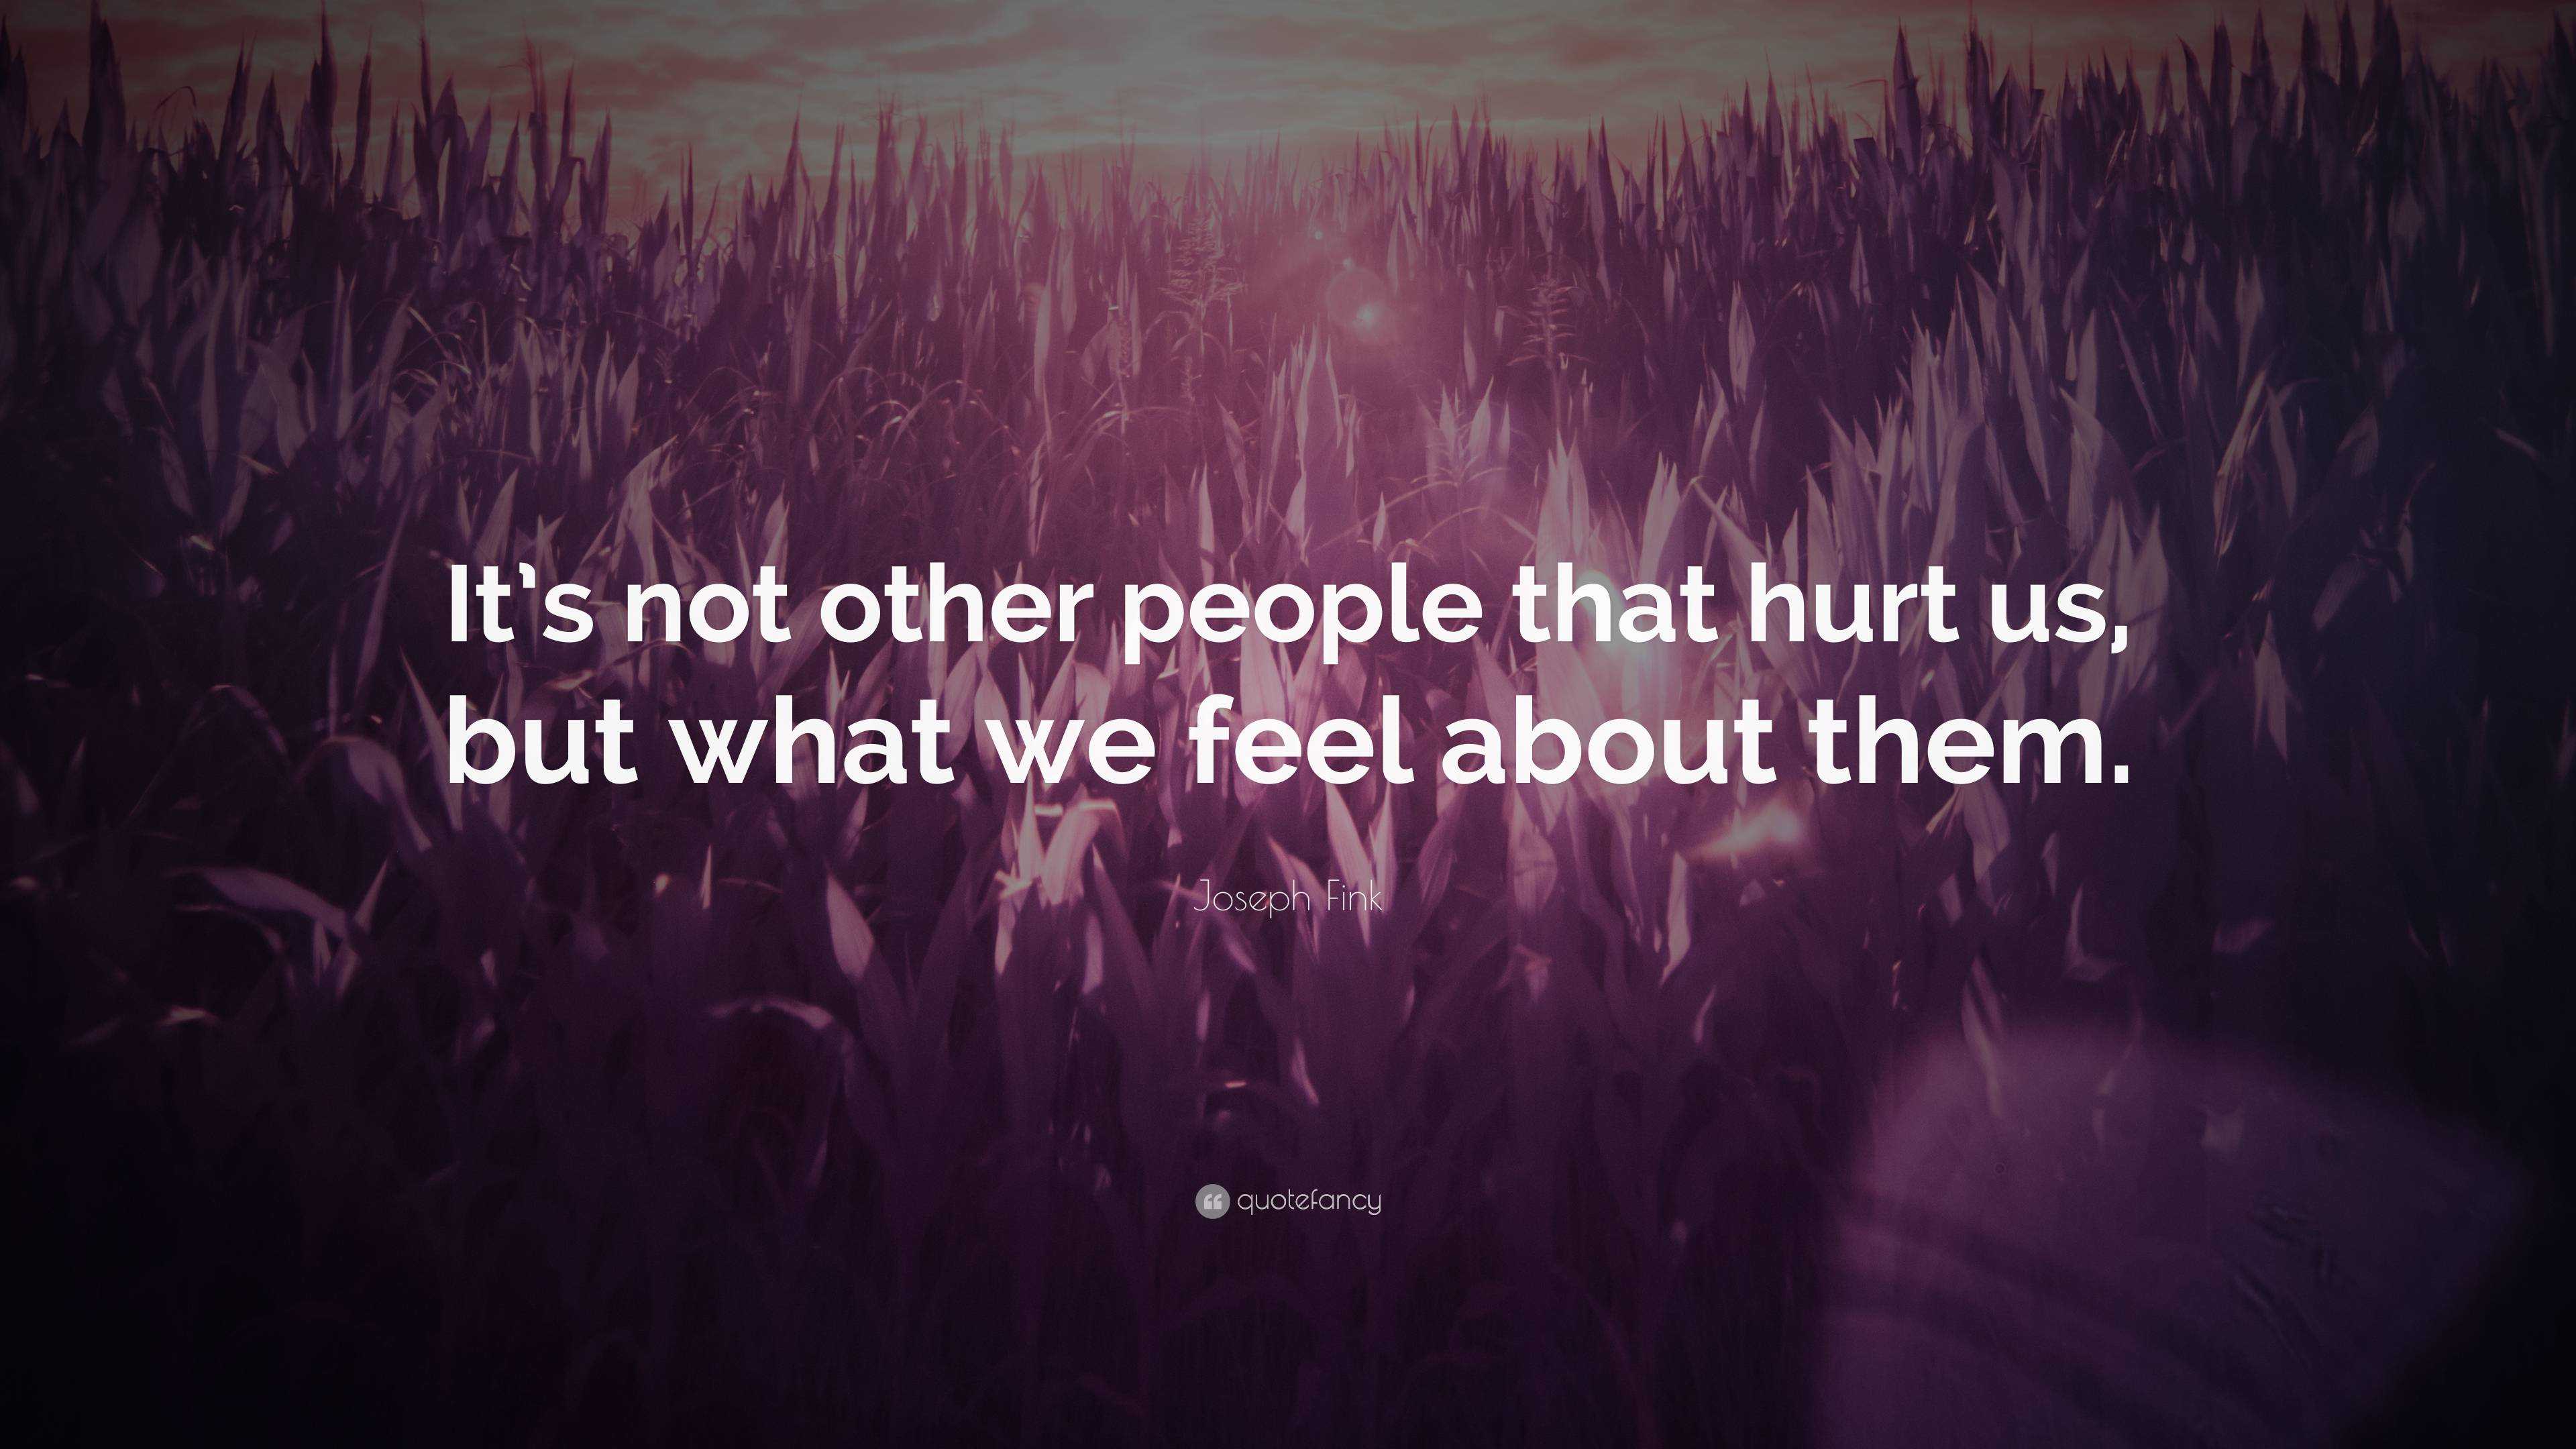 Joseph Fink Quote: “It’s not other people that hurt us, but what we ...